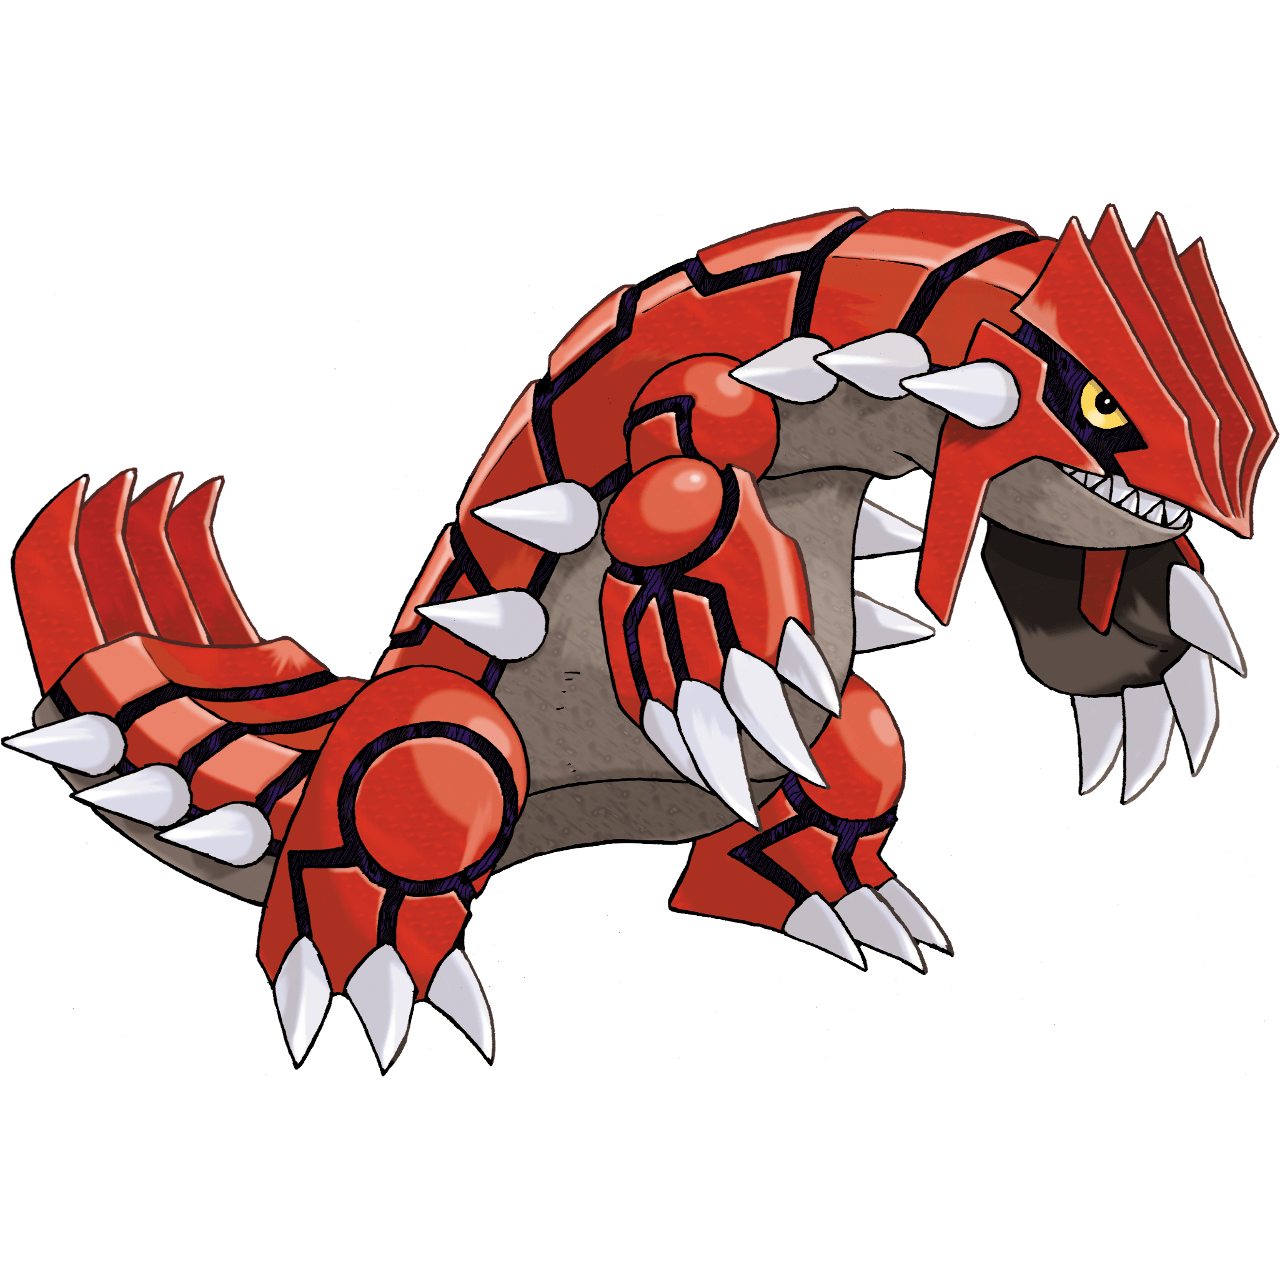 Pokemon Go Groudon Raid counters and best movesets